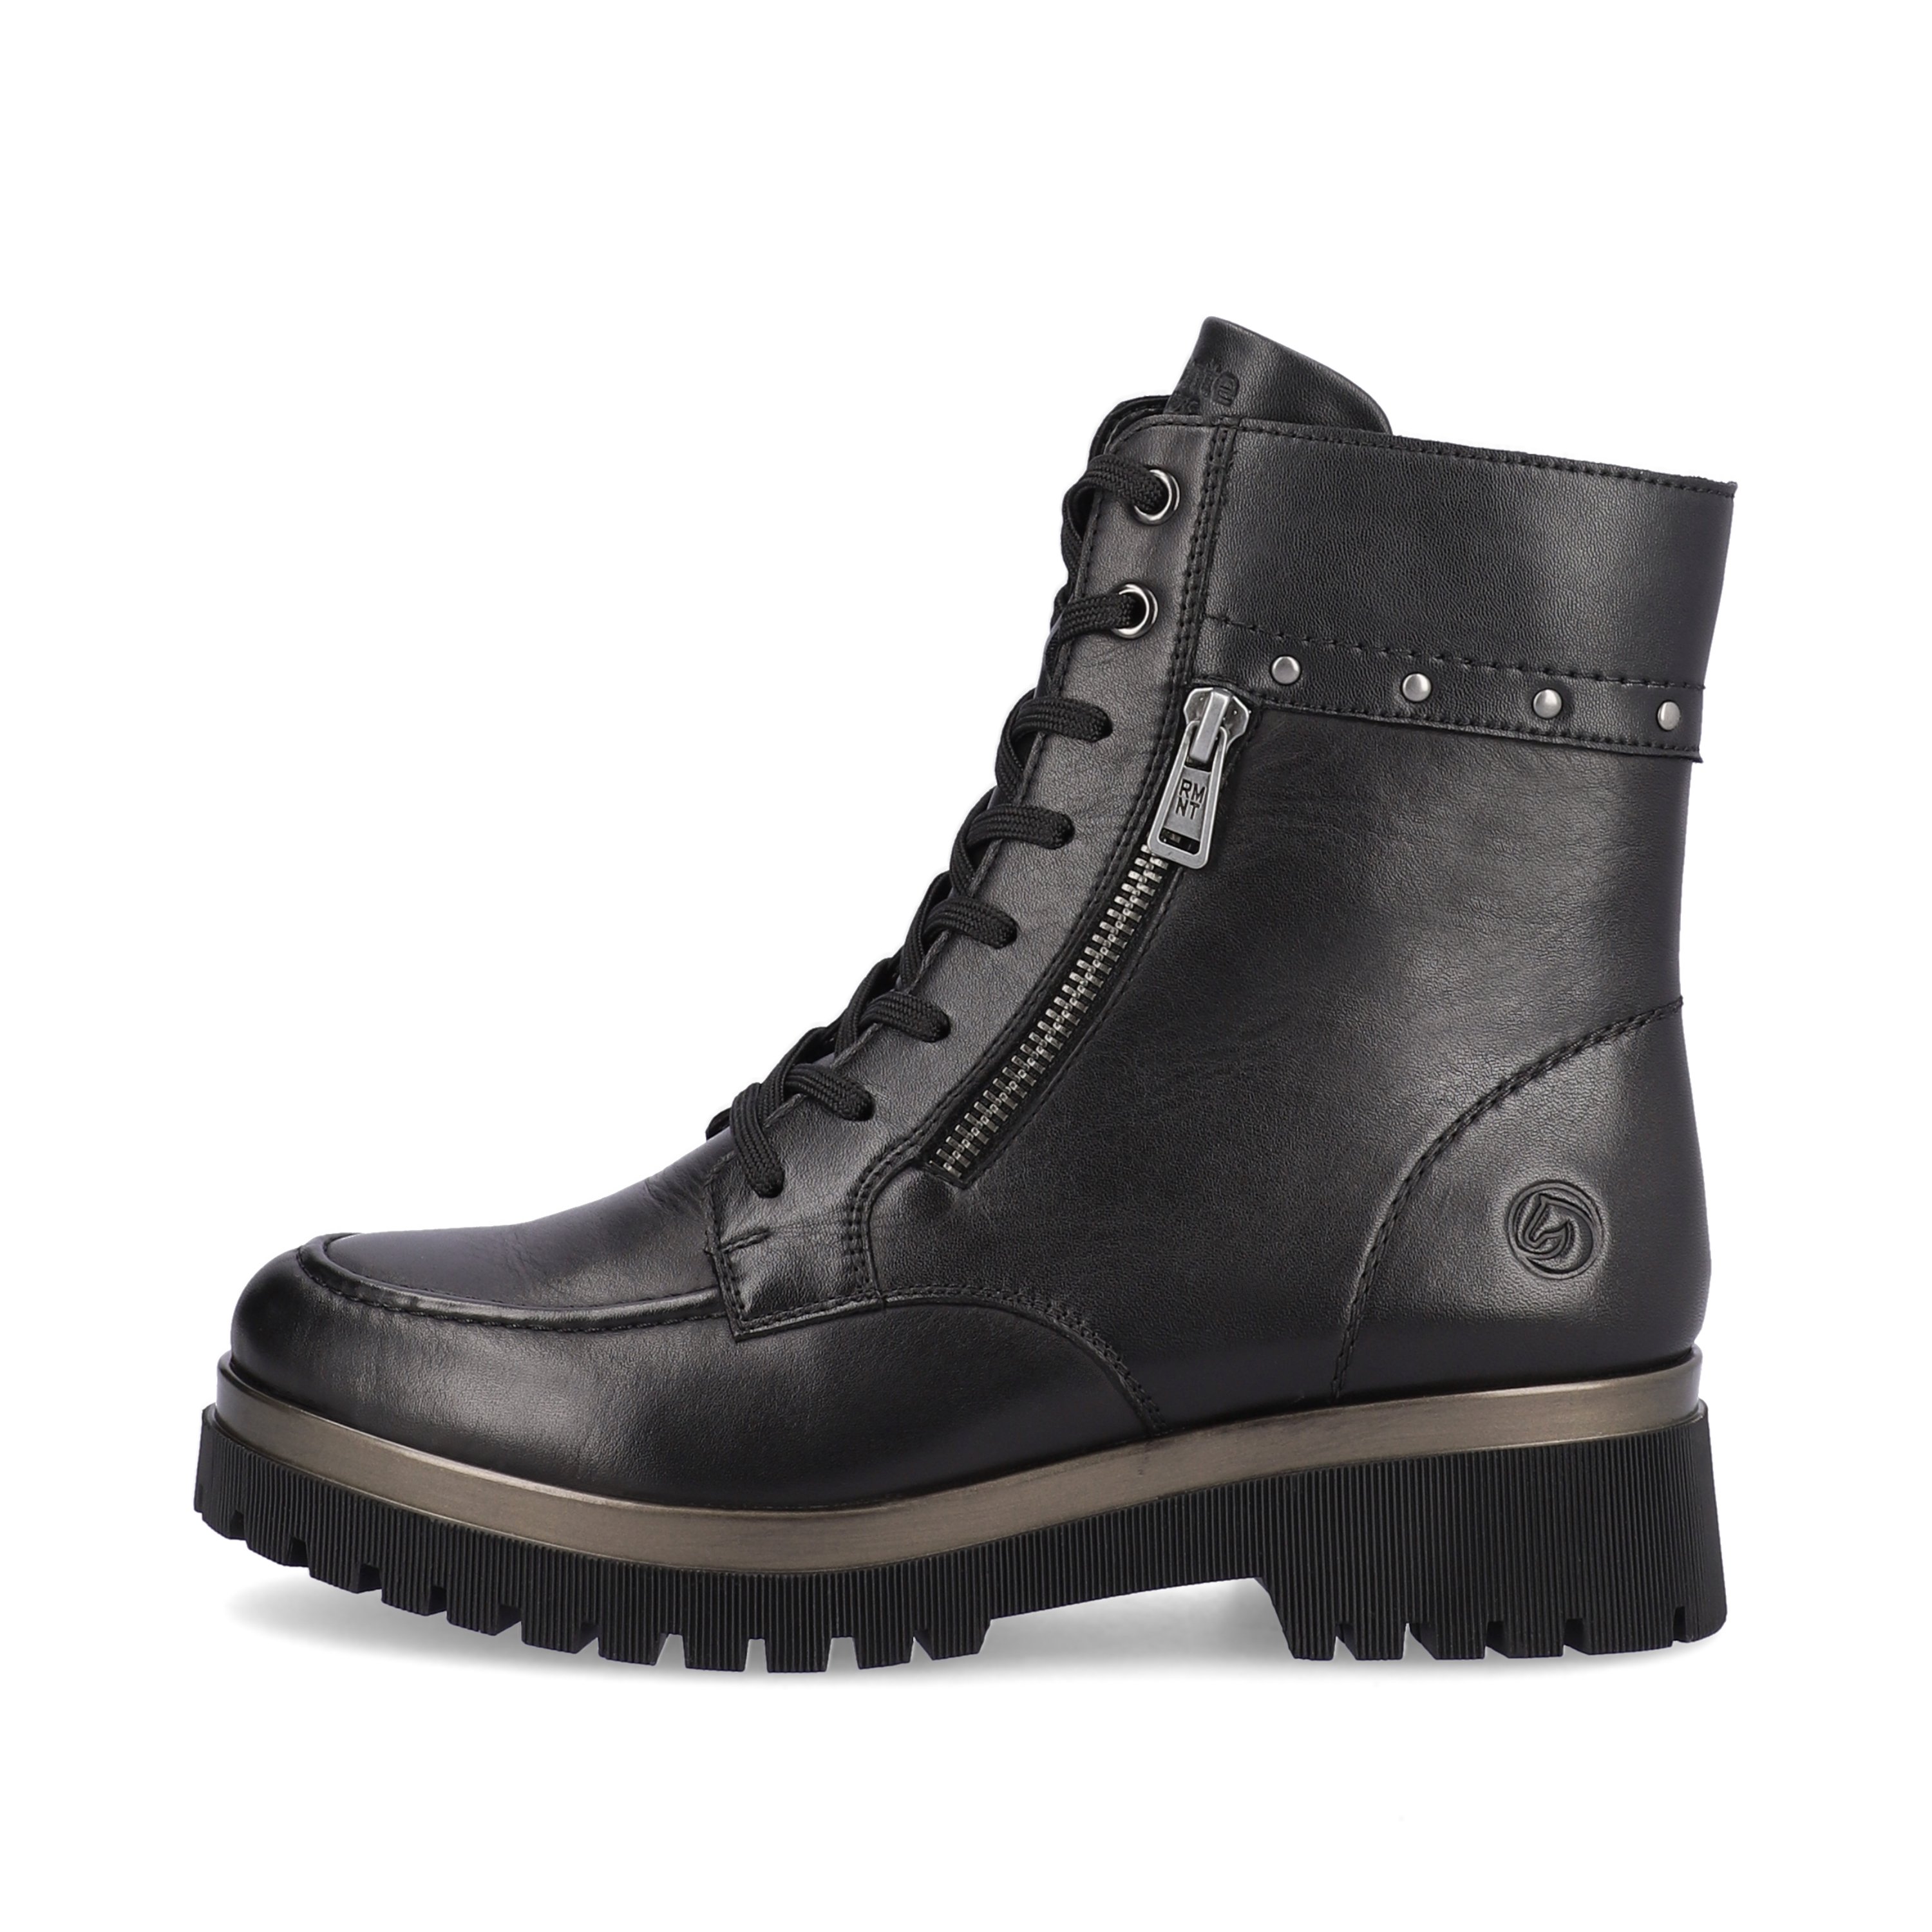 Glossy black remonte women´s biker boots D1B72-01 with cushioning profile sole. The outside of the shoe